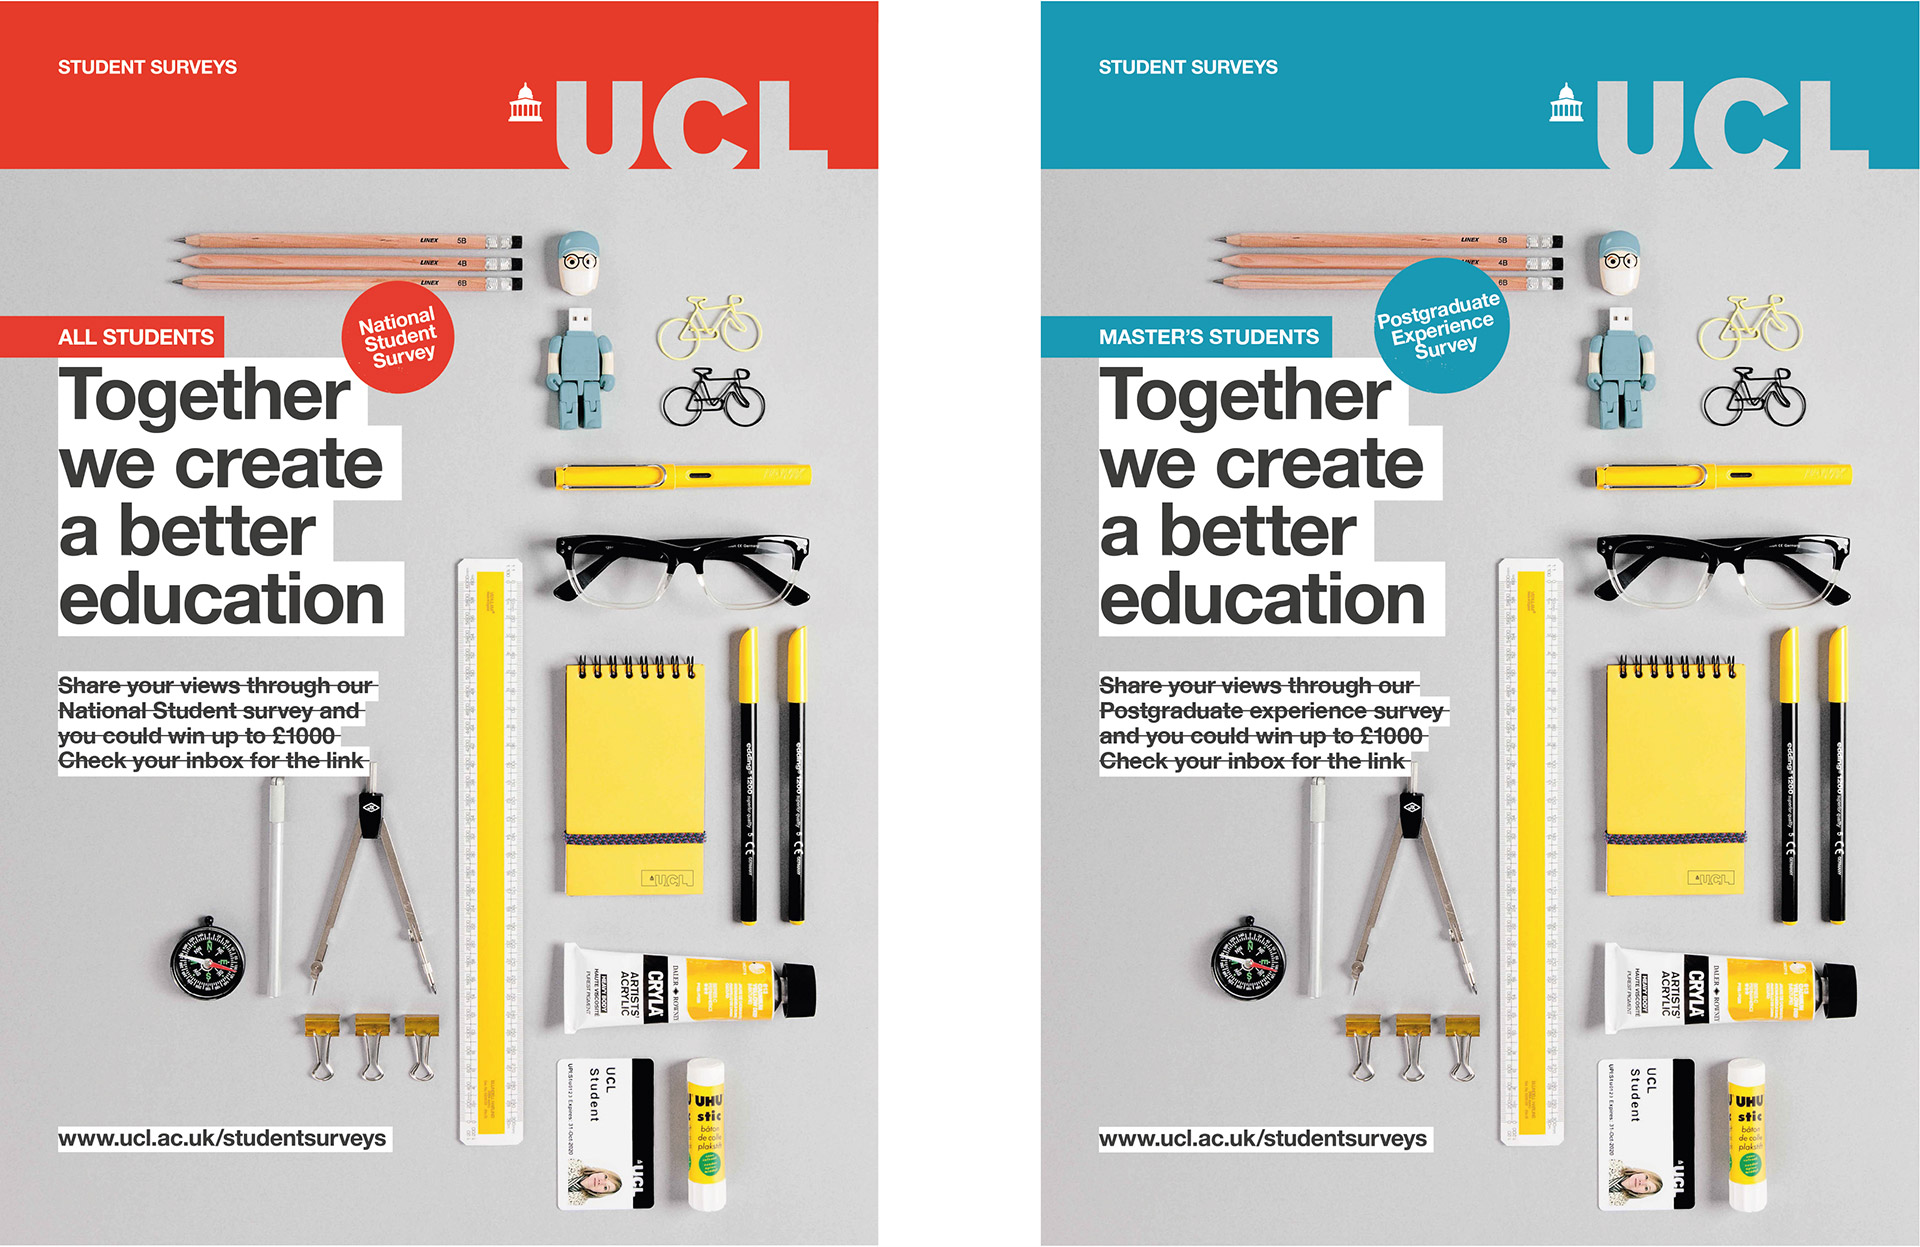 Student survey campaign for University College London designed by Irish Butcher